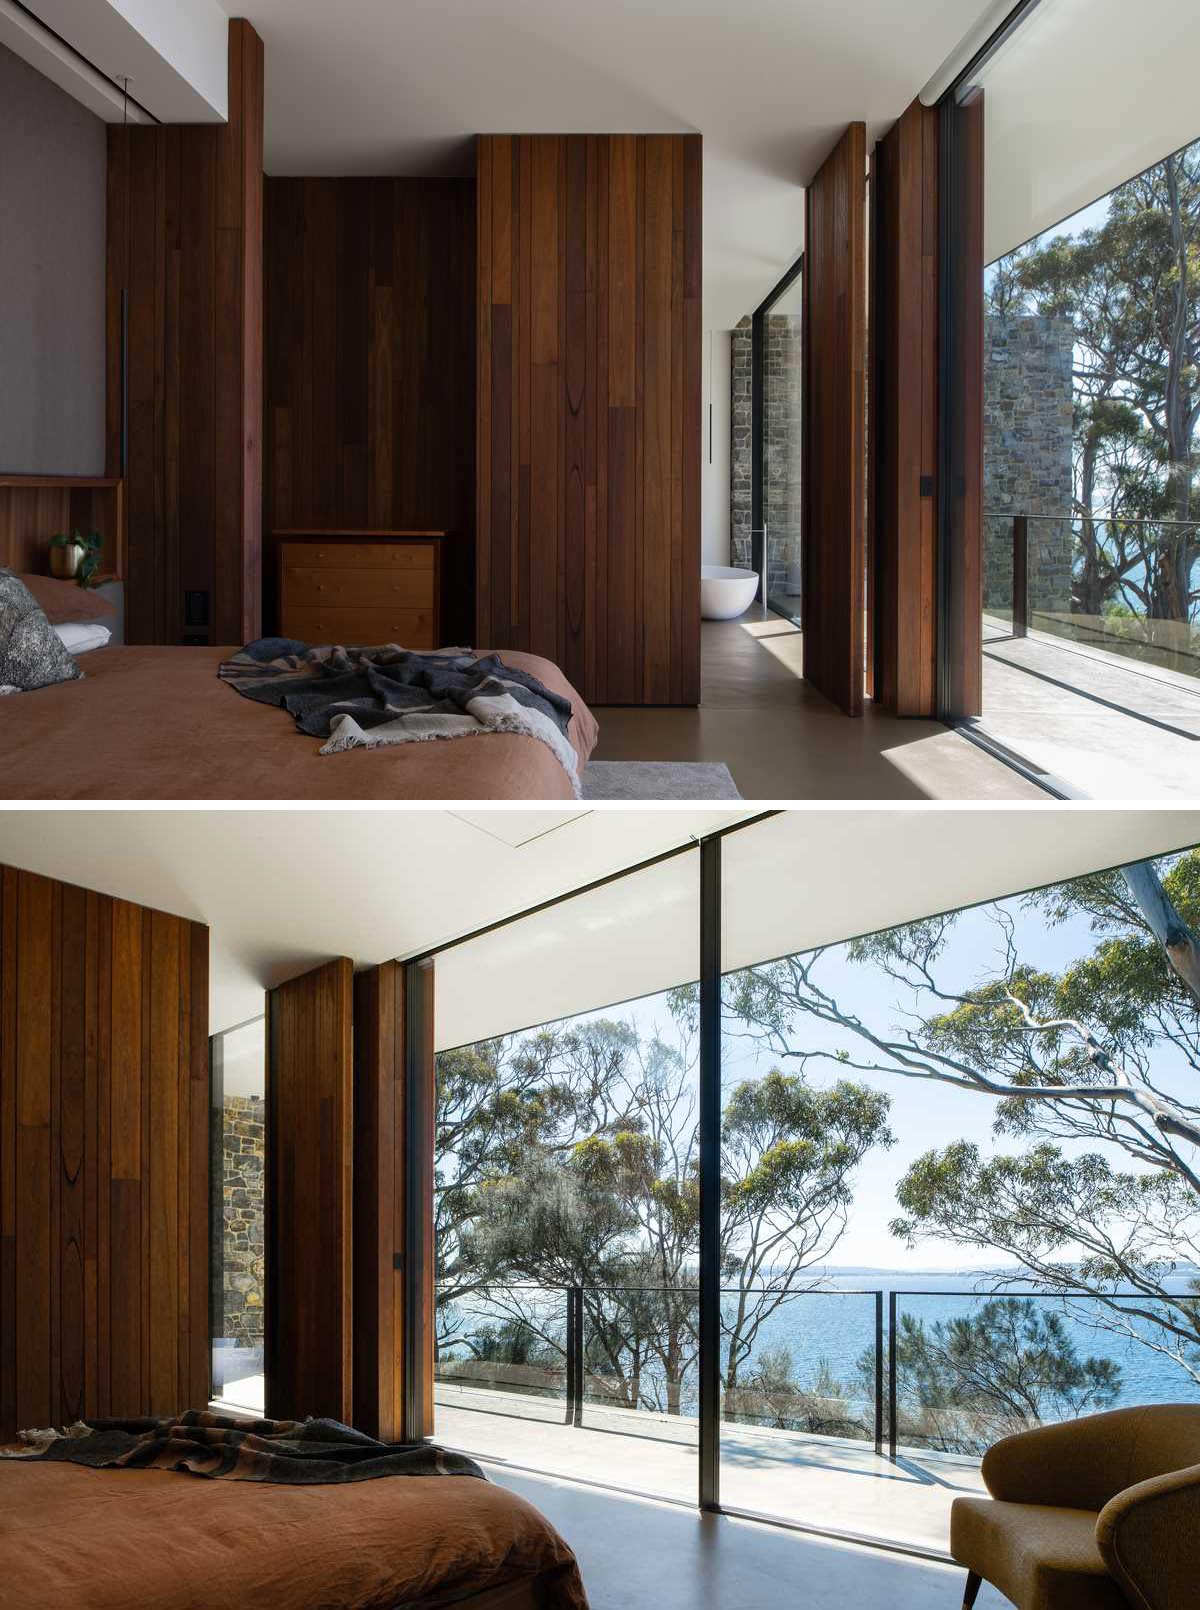 A modern bedroom with floor-to-ceiling windows, and a wood wall that includes a pivoting door that opens to reveal the bathroom.